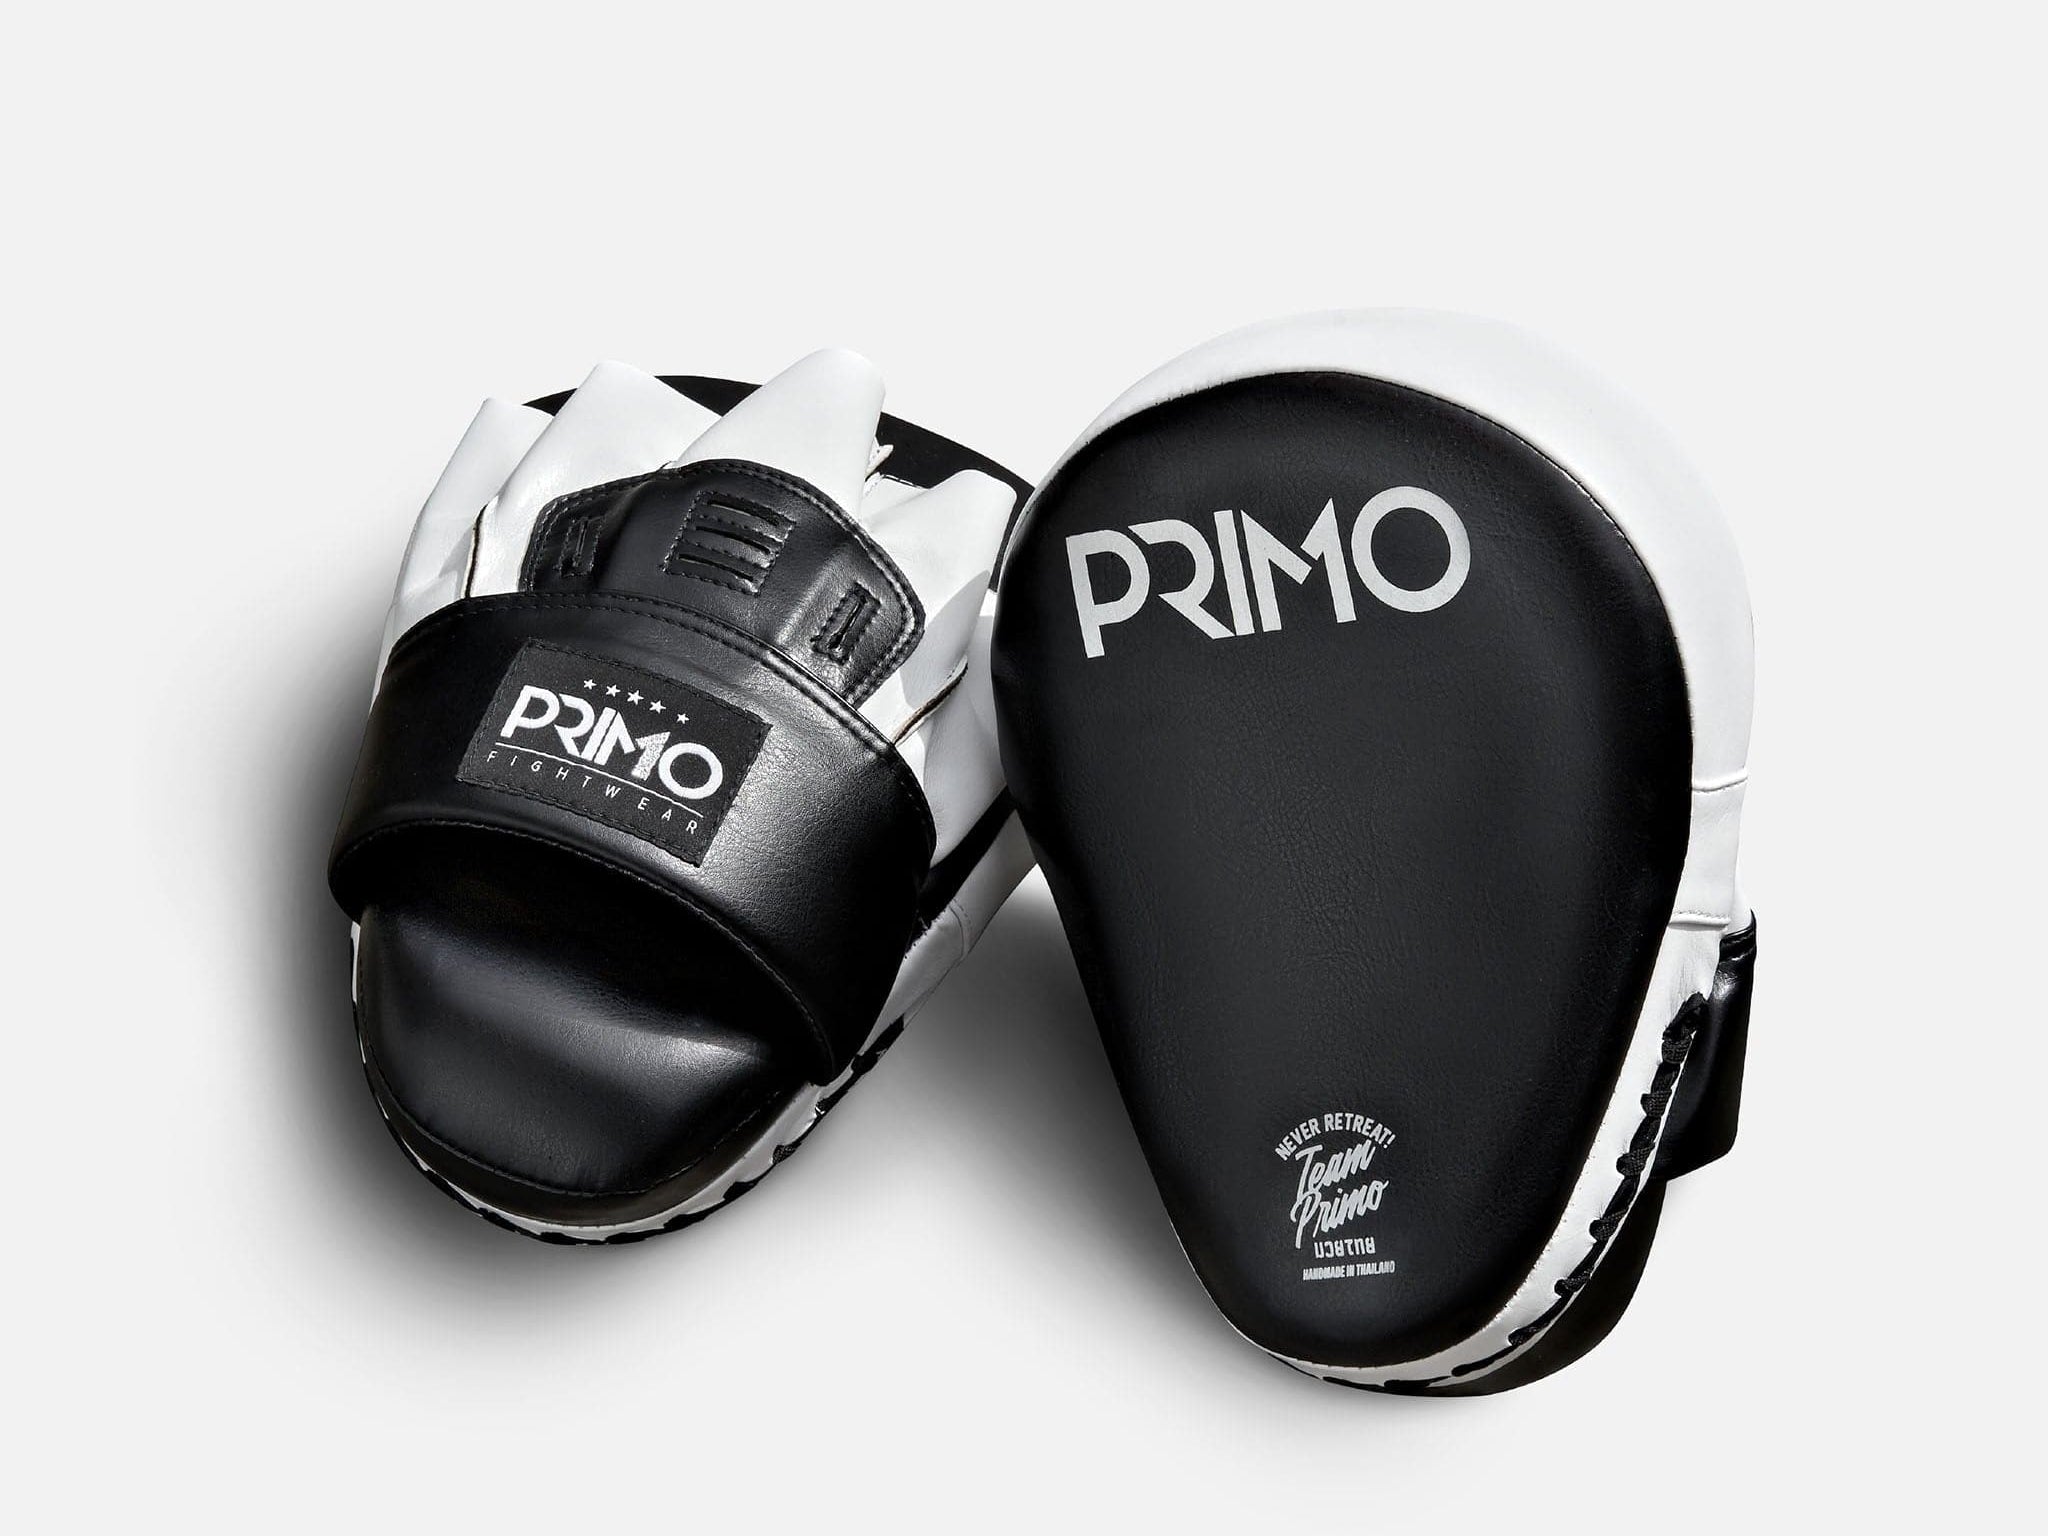 Primo Fight Wear Official Primo Striking Focus Mitts